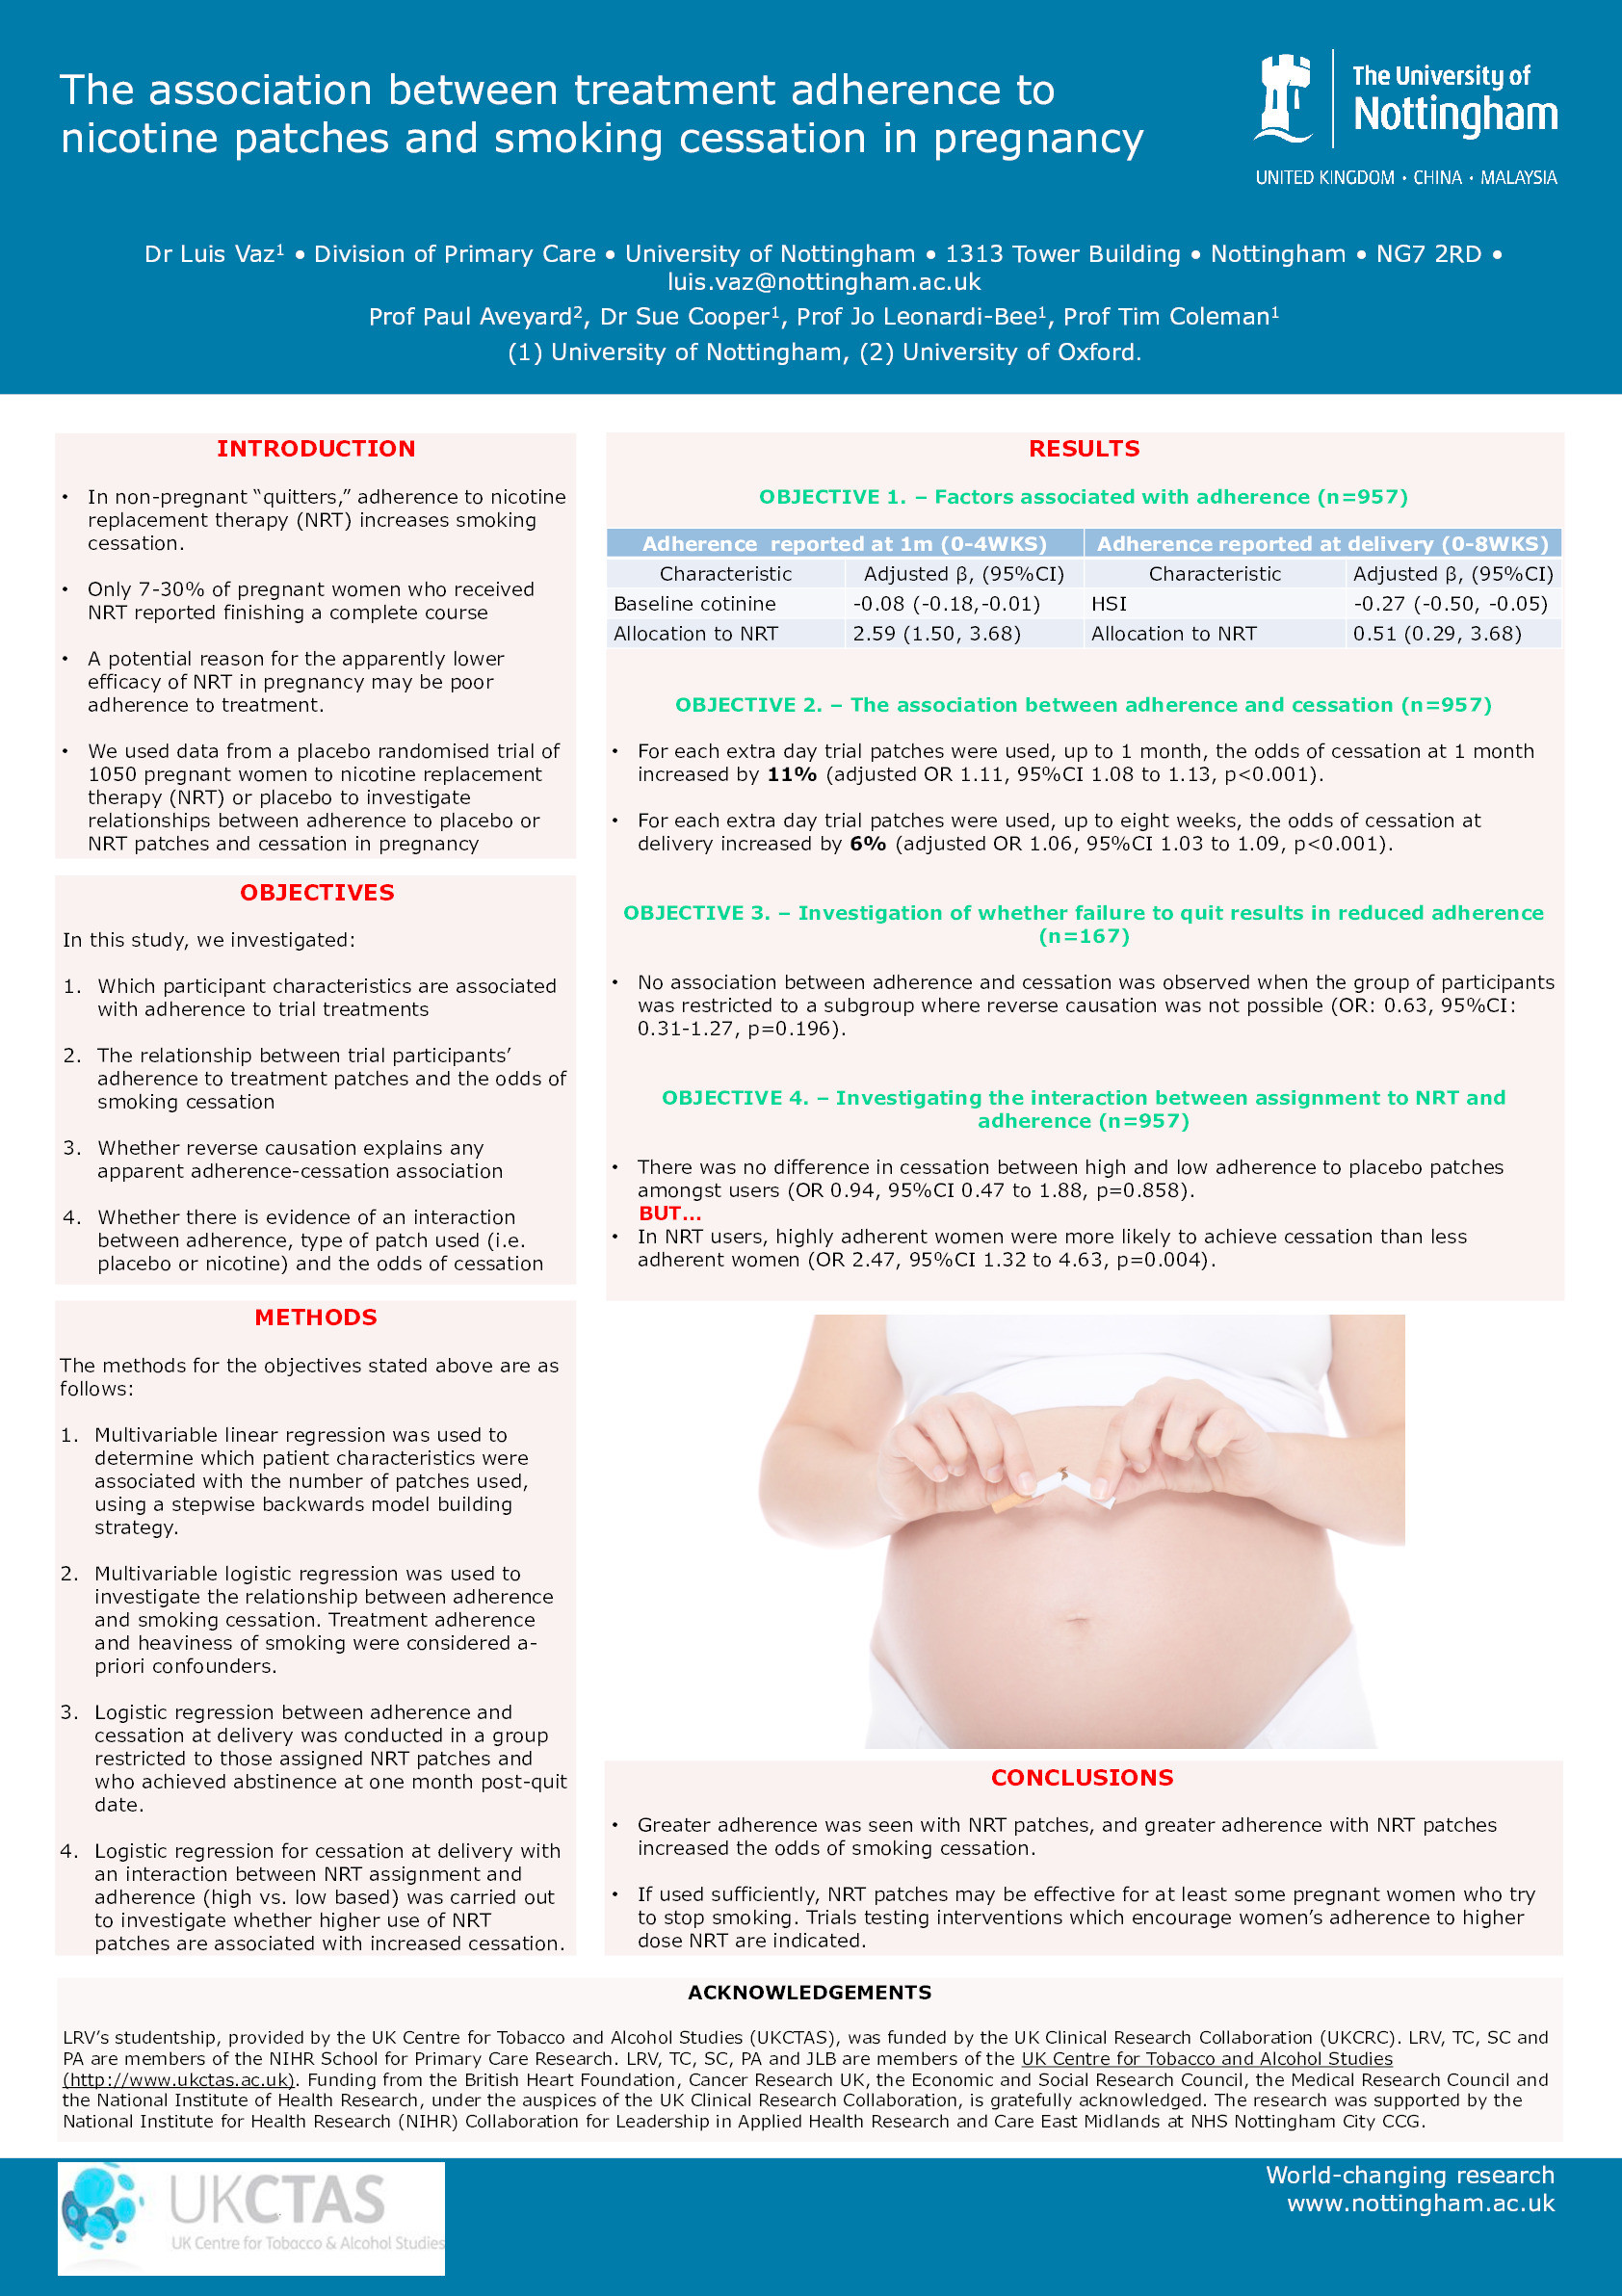 The association between treatment adherence to nicotine patches and smoking cessation in pregnancy Thumbnail